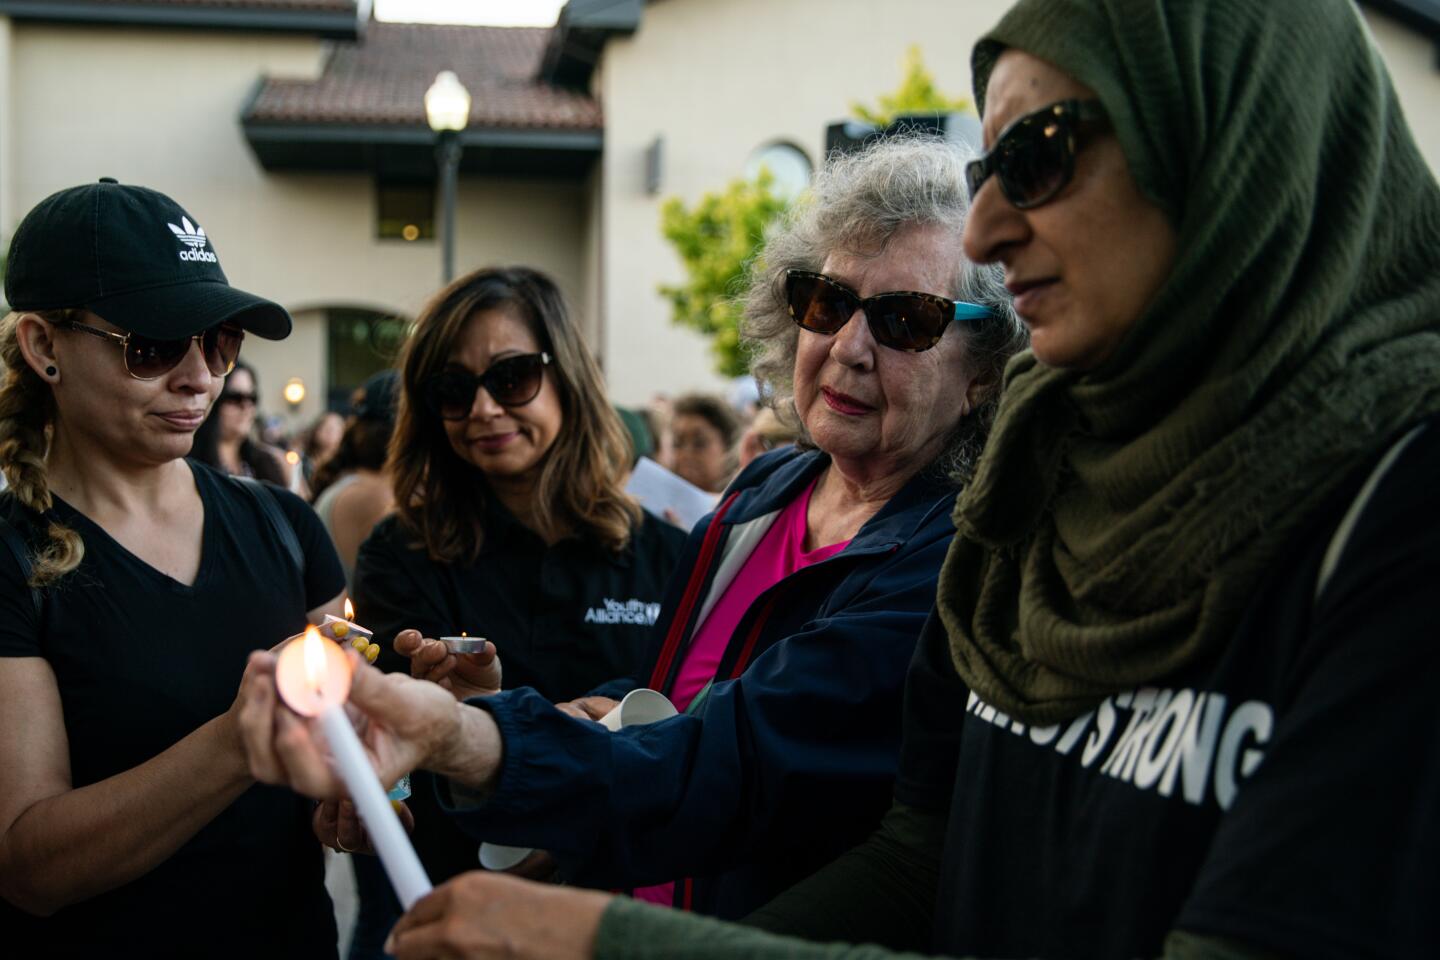 Gilroy residents light candles together during a vigil at Gilroy City Hall on Monday. (Kent Nishimura / Los Angeles Times)